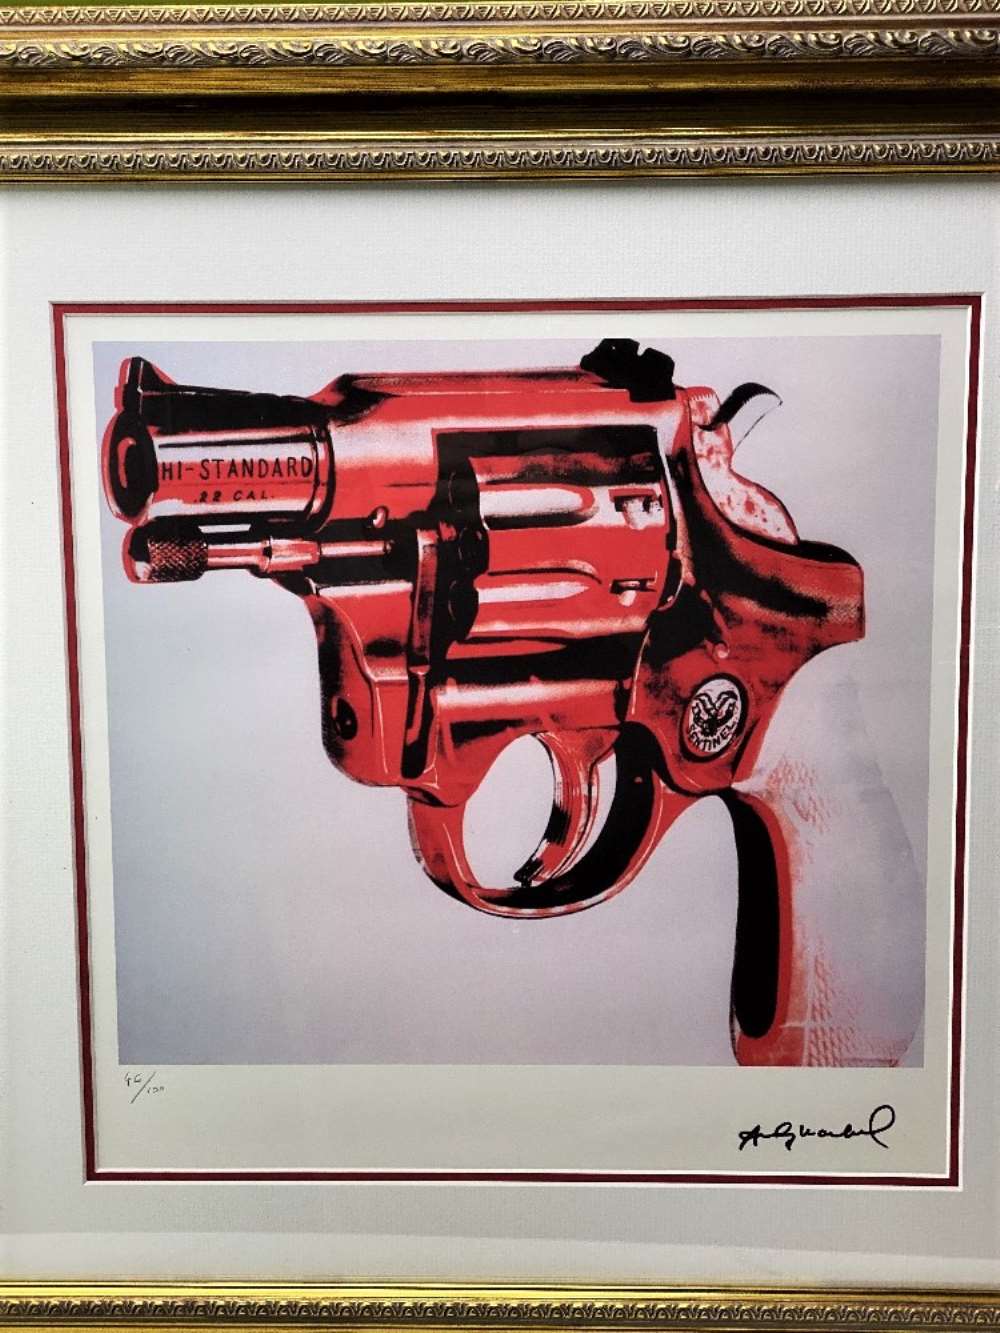 Andy Warhol (1928-1987) “Revolver” Leo Castelli Gallery-New York Numbered Ltd Edition of 100 Lithogr - Image 2 of 7